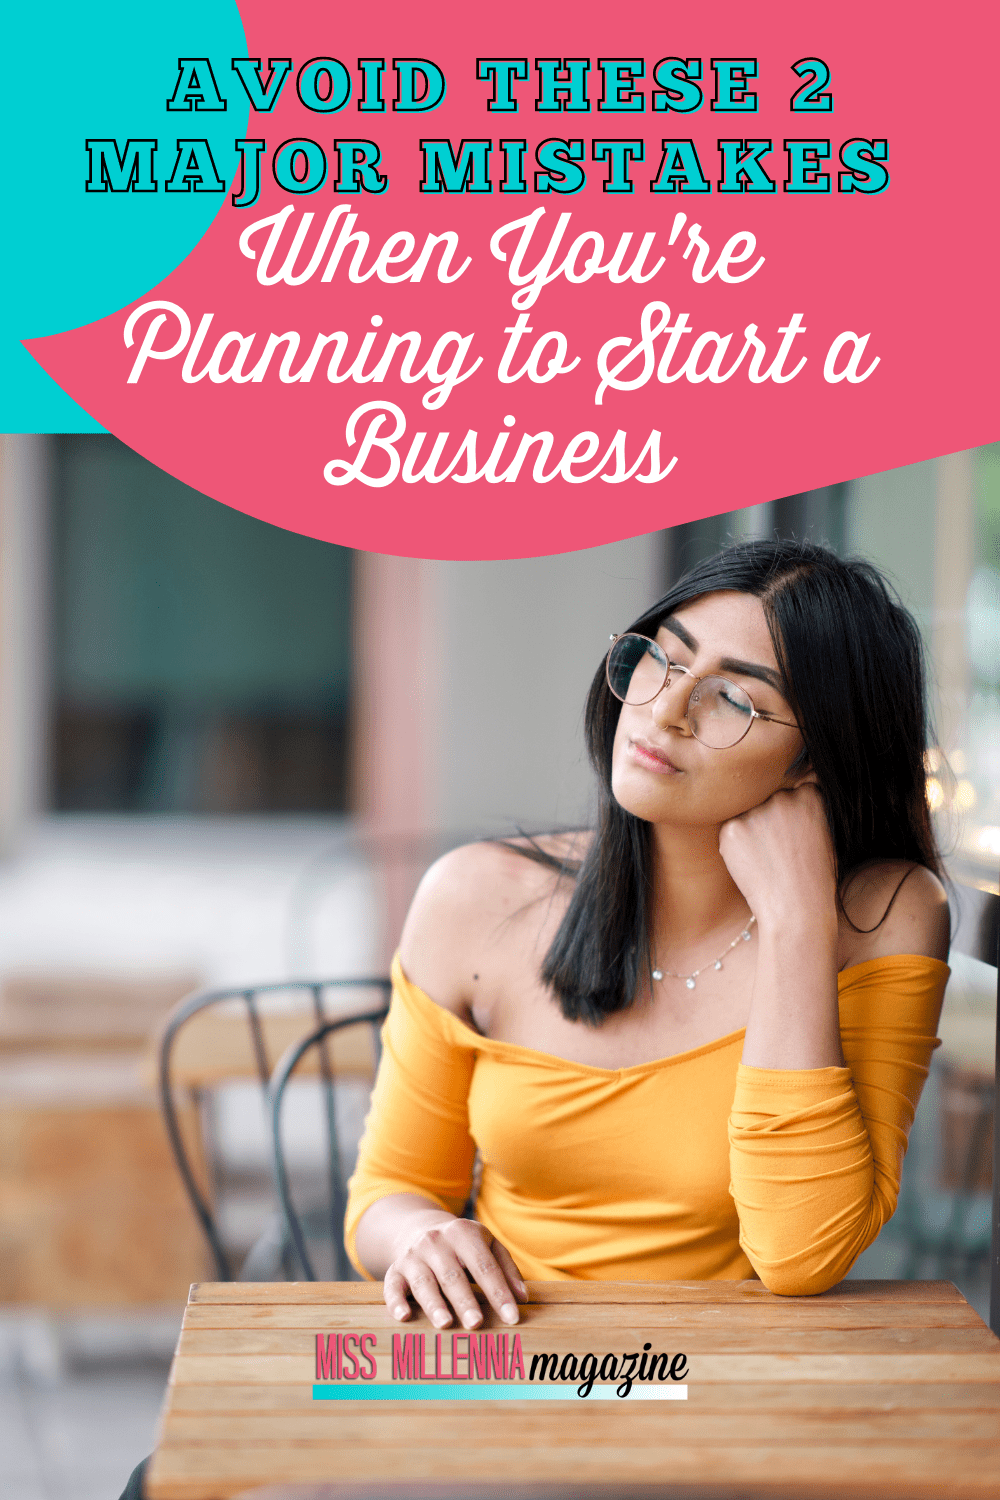 Avoid These 2 Major Mistakes When You’re Planning to Start a Business